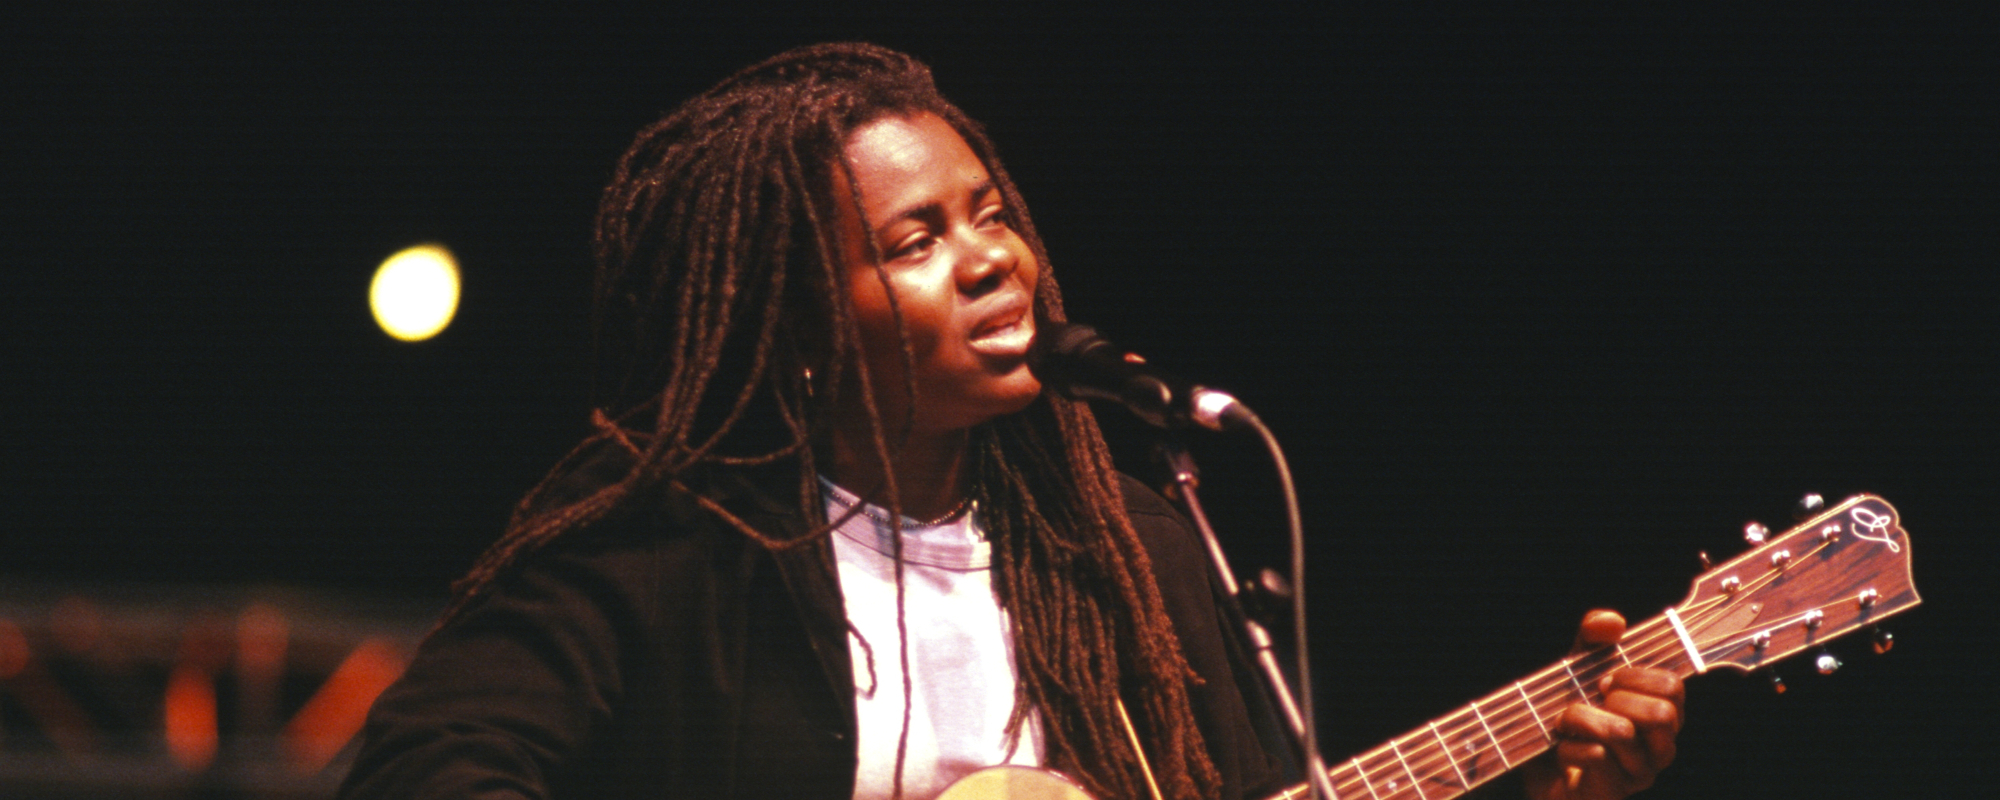 Tracy Chapman Becomes First Black Woman to Score No. 1 Song on Country Chart as Sole Writer